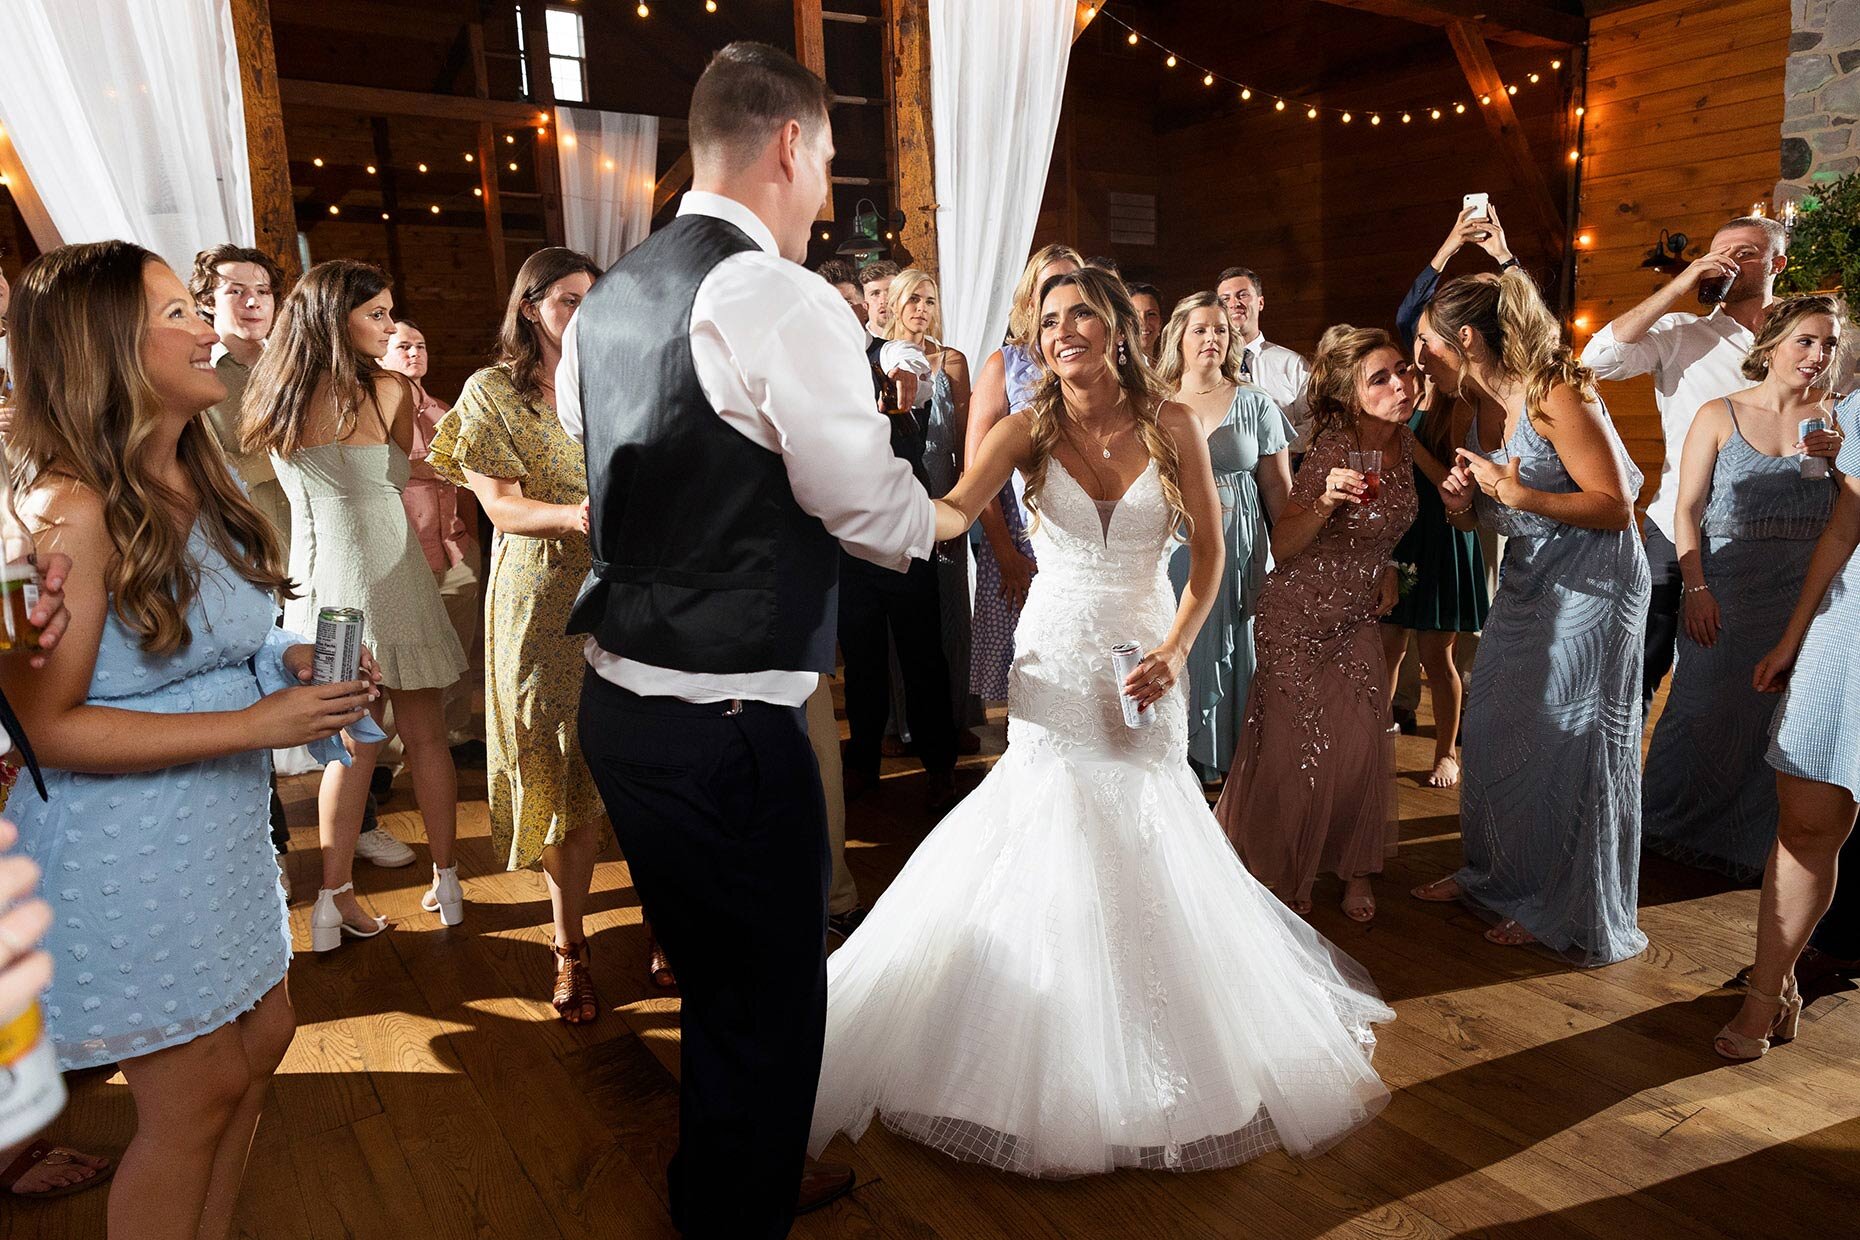 Bride and groom dancing at reception